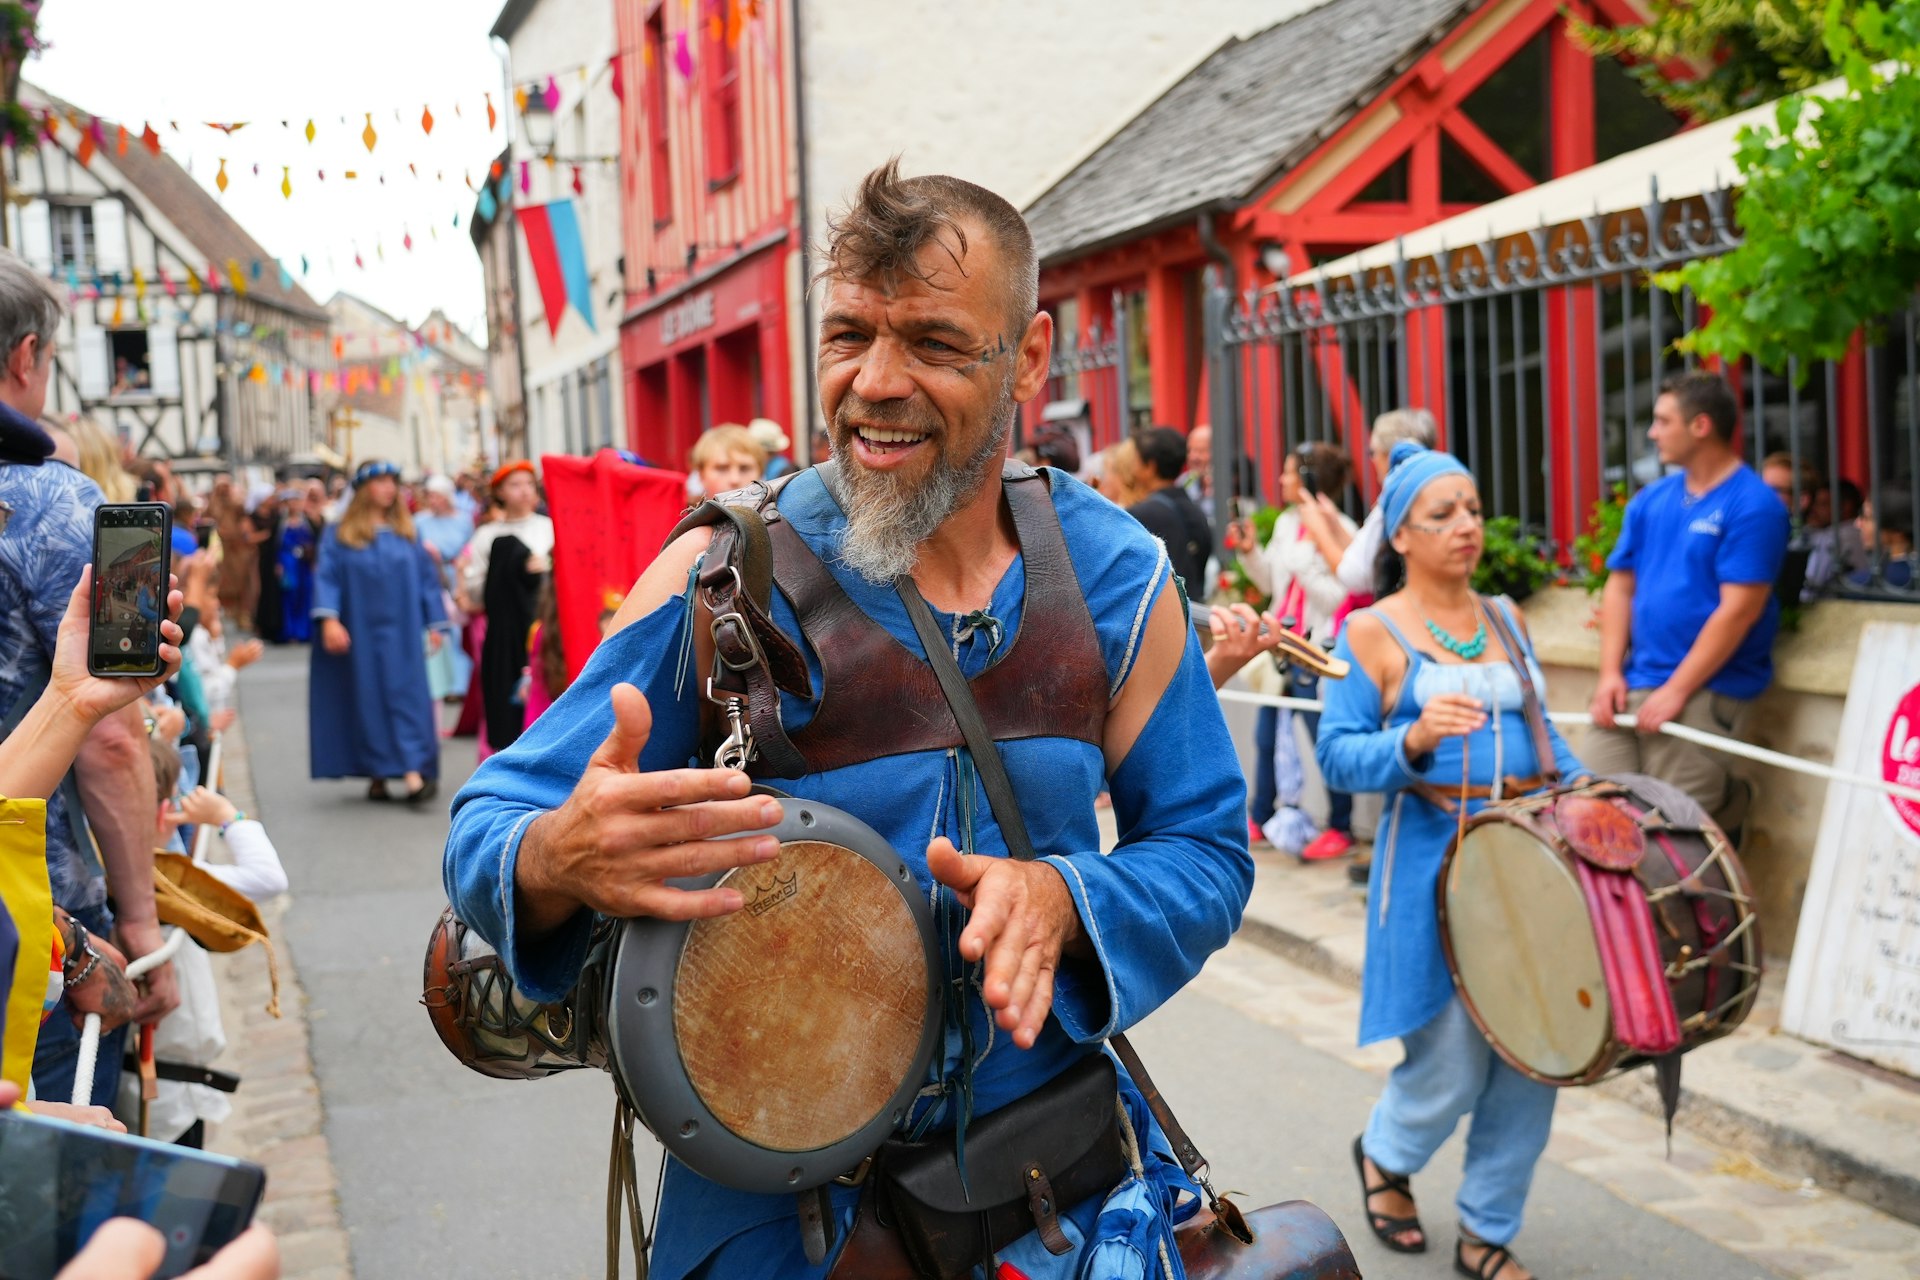  Group of musicians playing djembe in the streets at the "Médiévales de Provins" medieval fair in the UNESCO World Heritage town of Provins